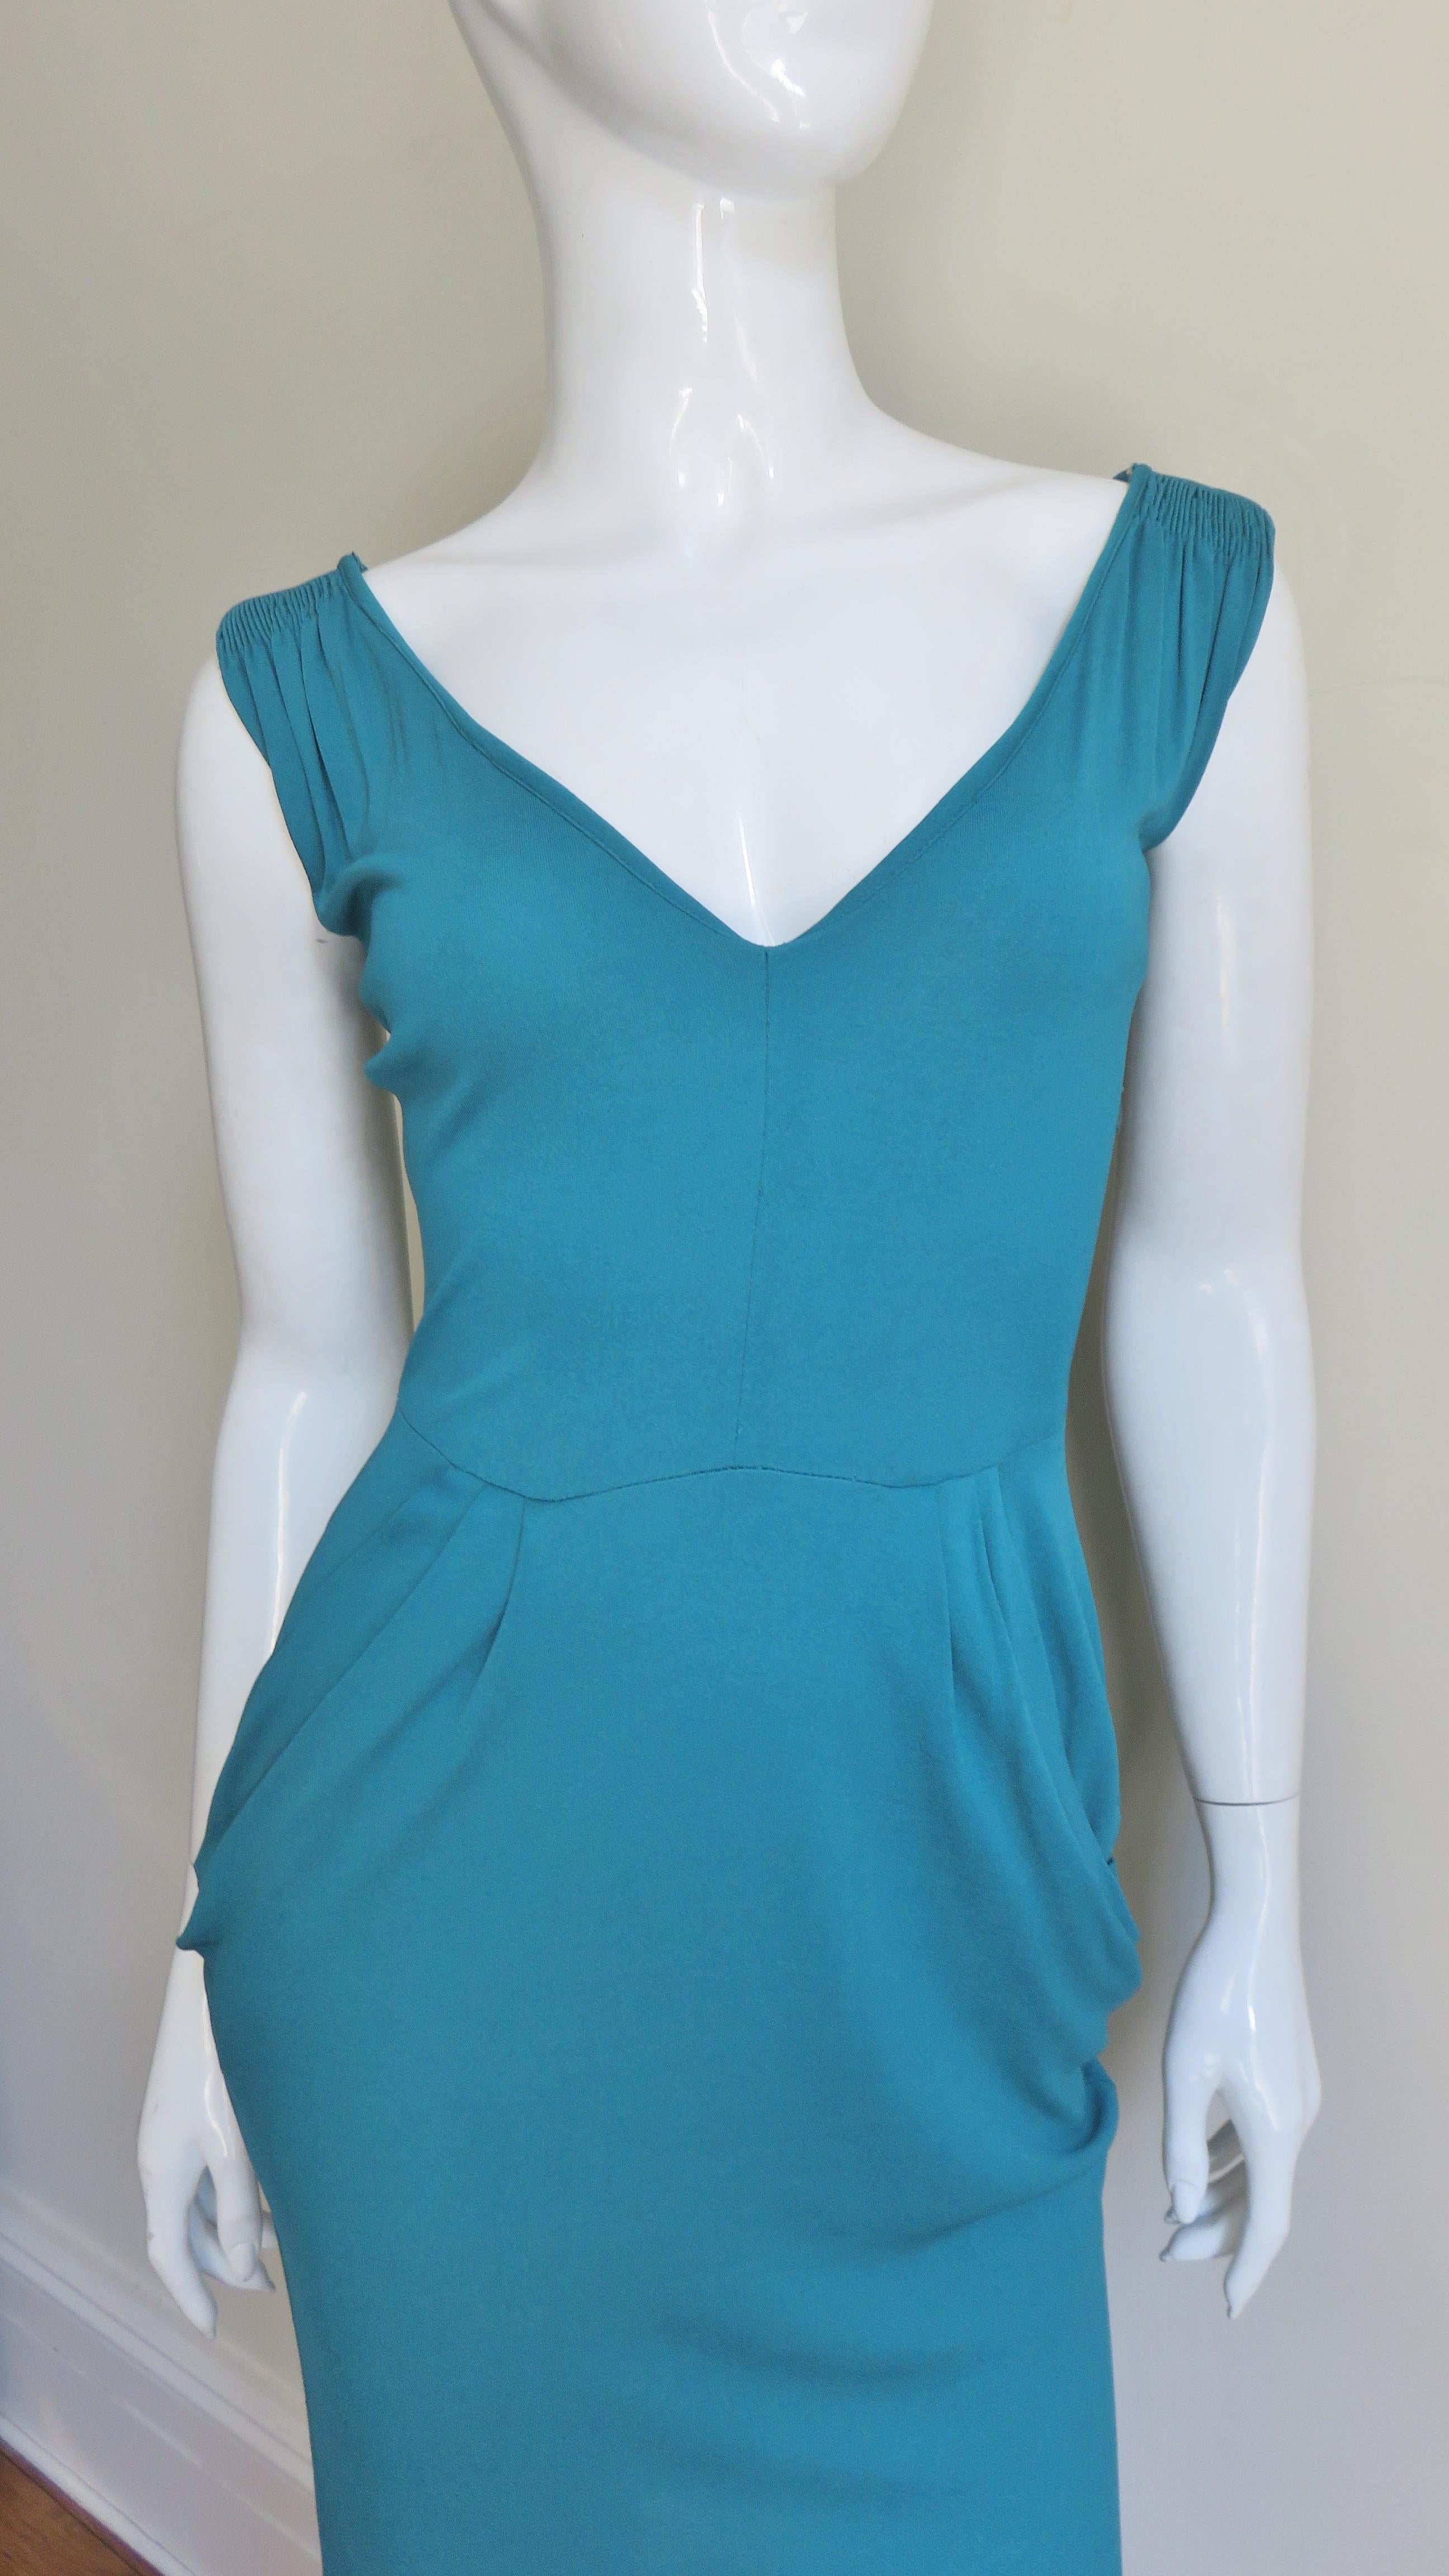 A beautiful turquoise jersey dress from Norma Kamali's Omo collection. It is sleeveless with a V neckline, hip pockets and the skirt narrows towards the hem.  It has a matching side zipper and is unlined.  
Fits sizes Extra Small, Small.

Bust 